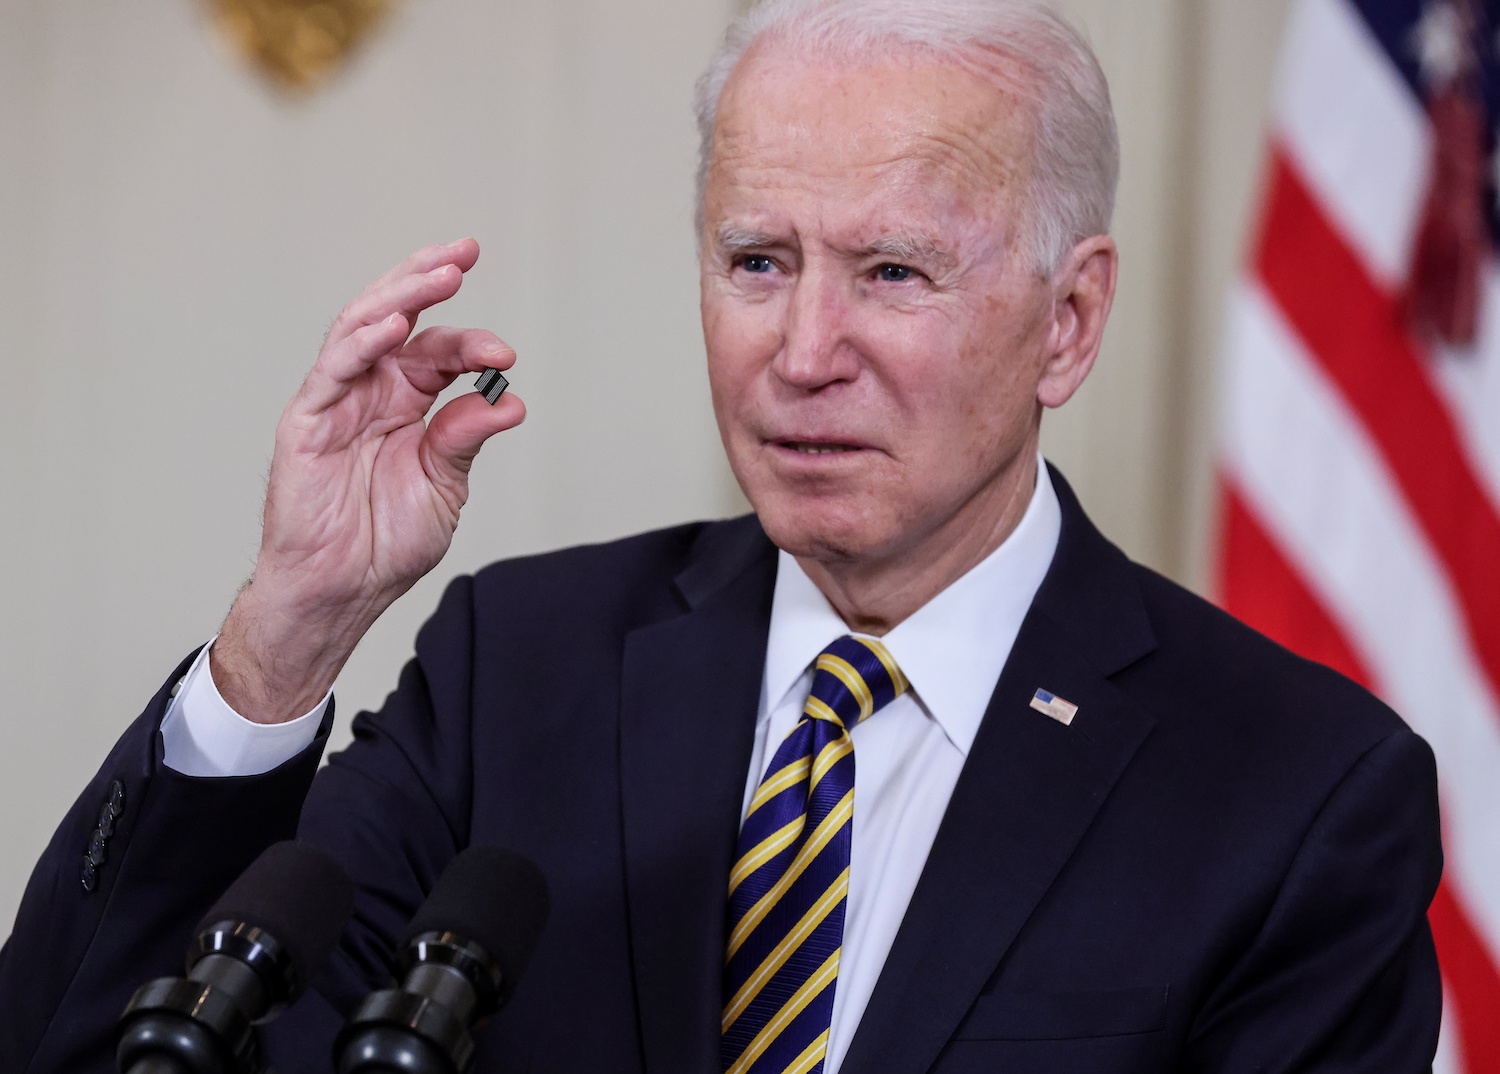 Biden sends warning to China on chips and rare earths